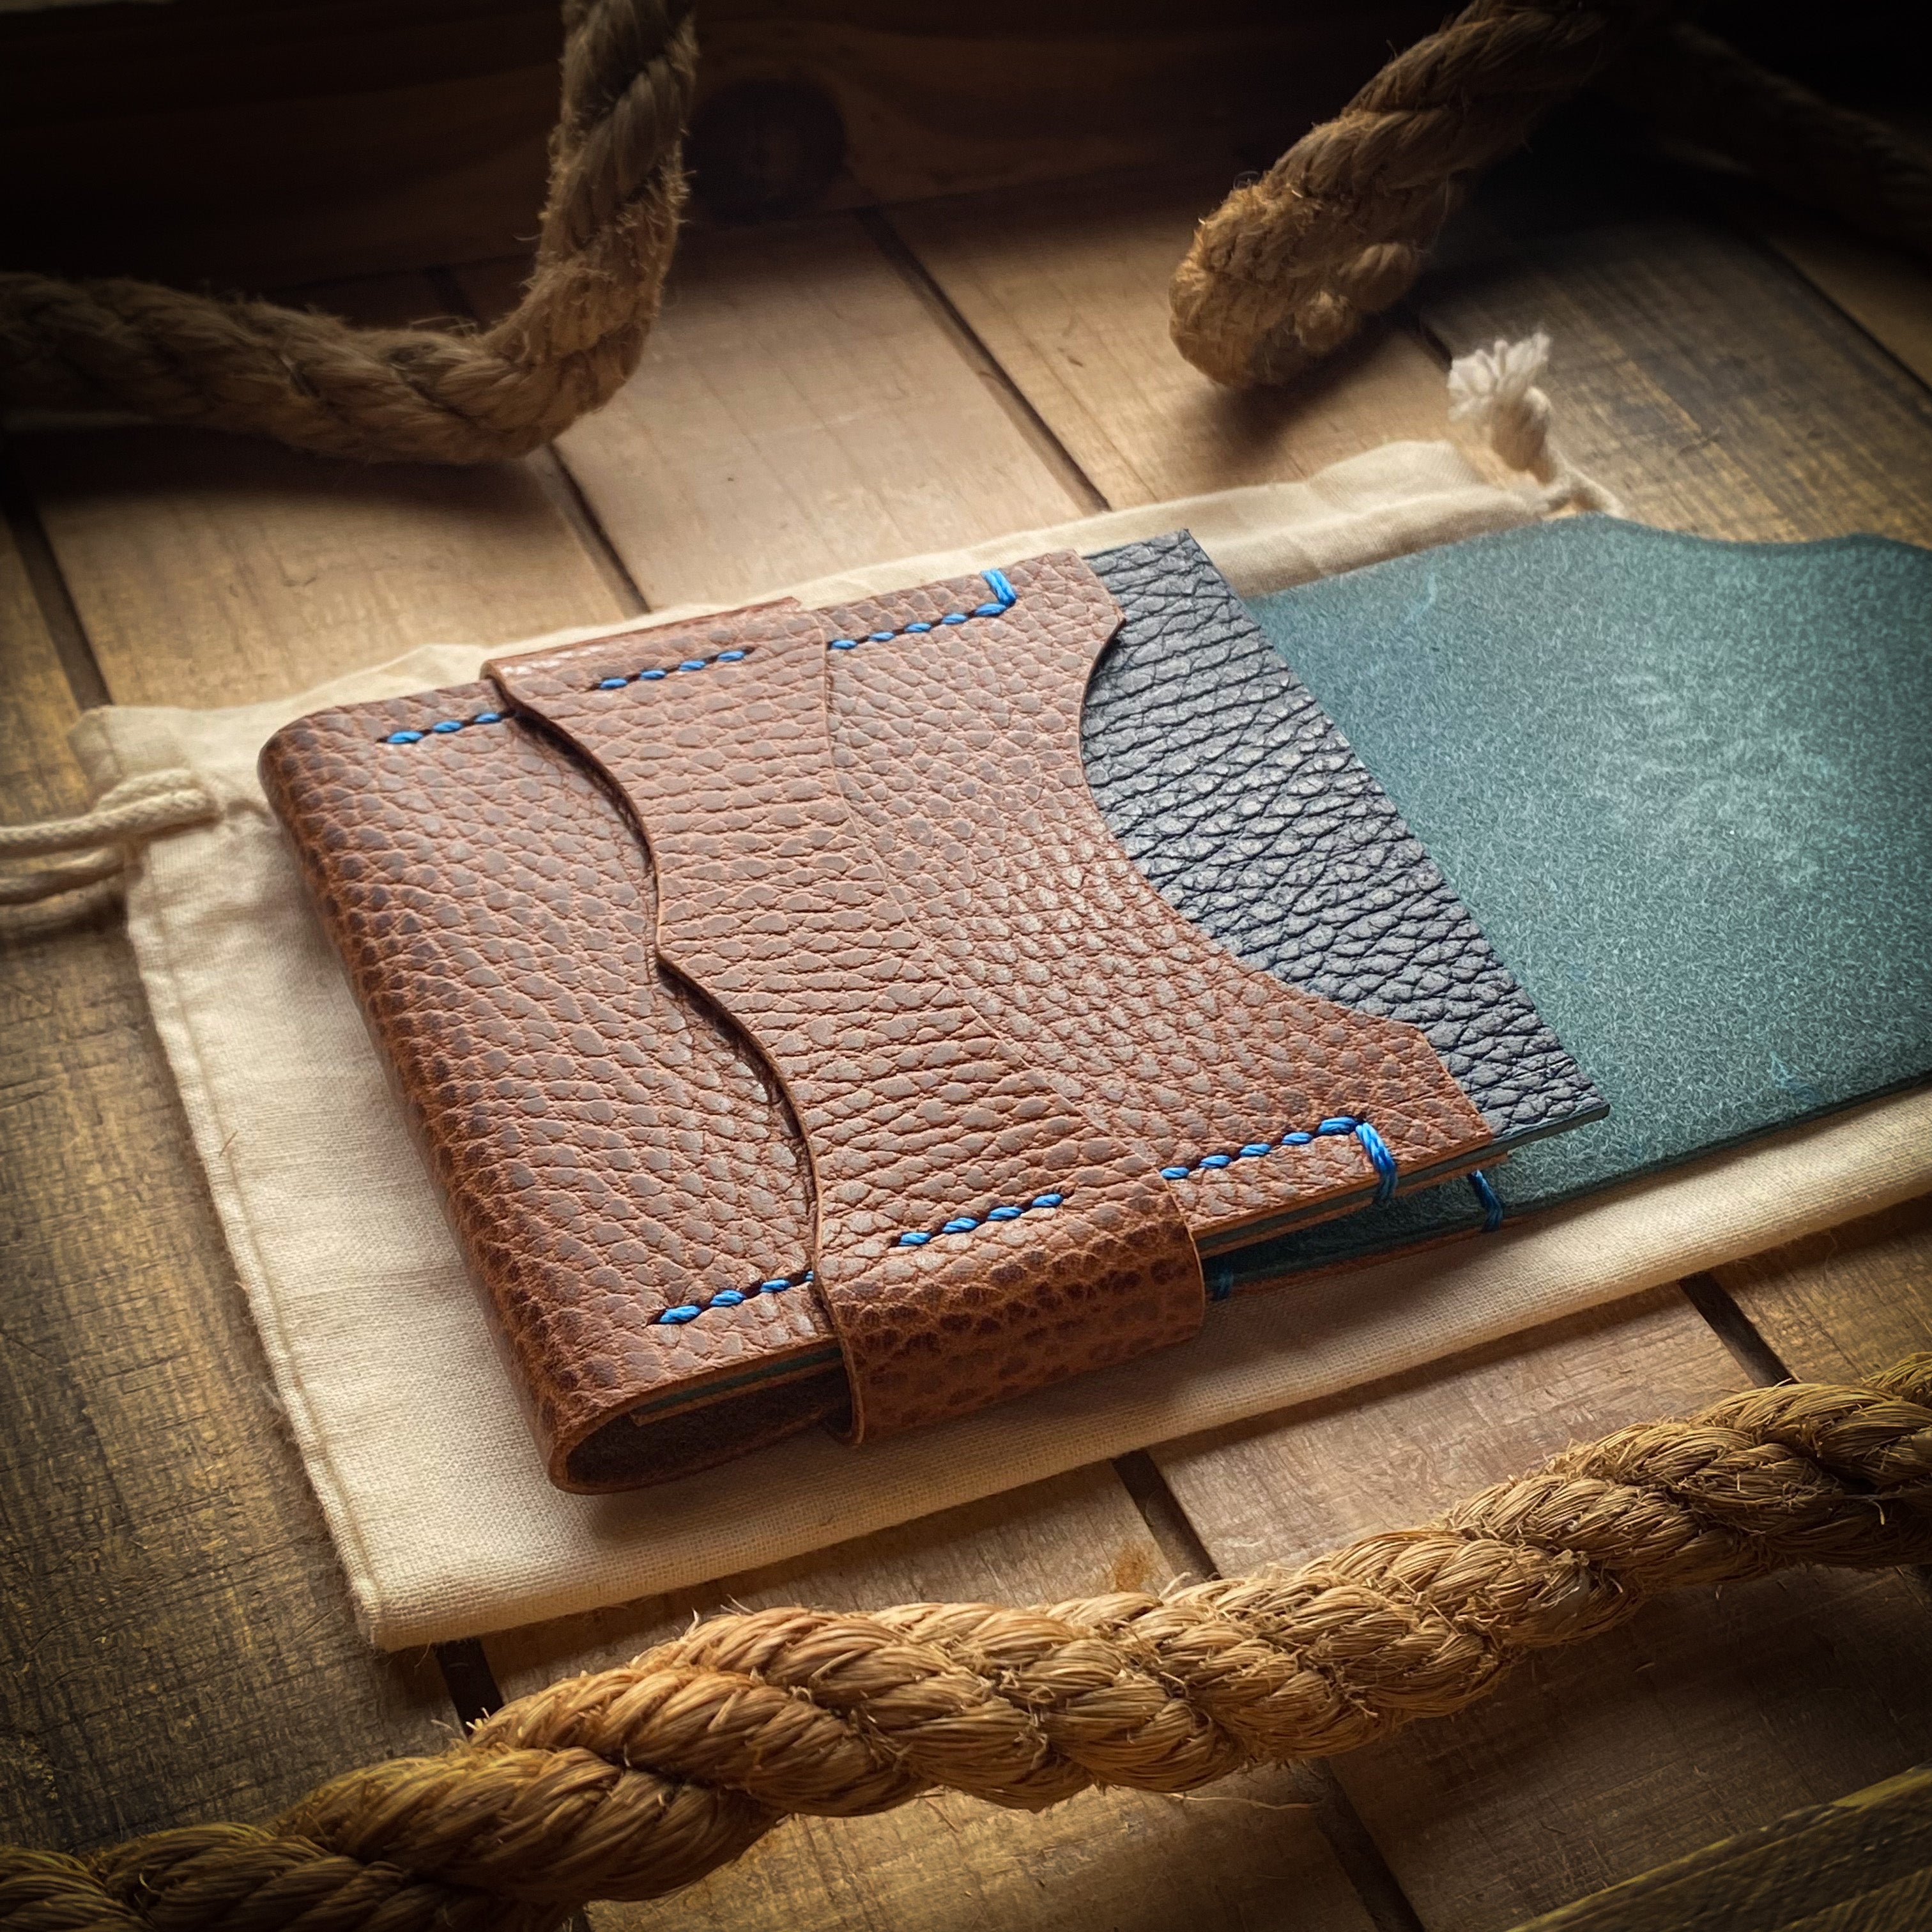 Luxe Minimalist Wallet - Quick Access - Blue Dollaro and Whiskey Dollaro